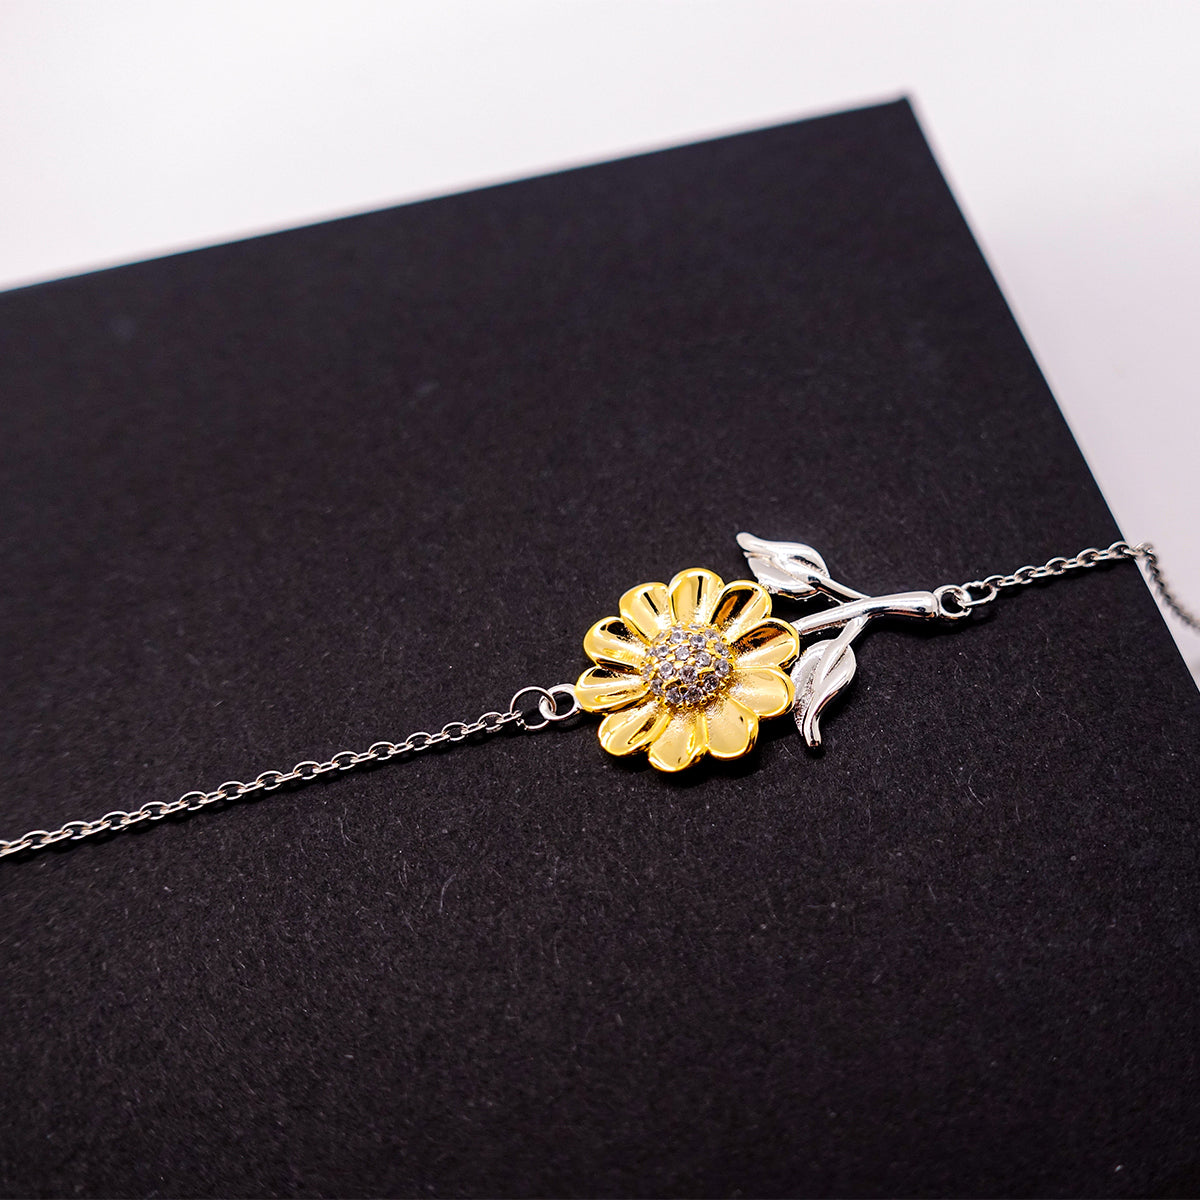 Heartwarming Sunflower Bracelet Retirement Coworkers Gifts for Substitute Teacher, Substitute Teacher May You be proud of the work you do, the person you are Gifts for Boss Men Women Friends